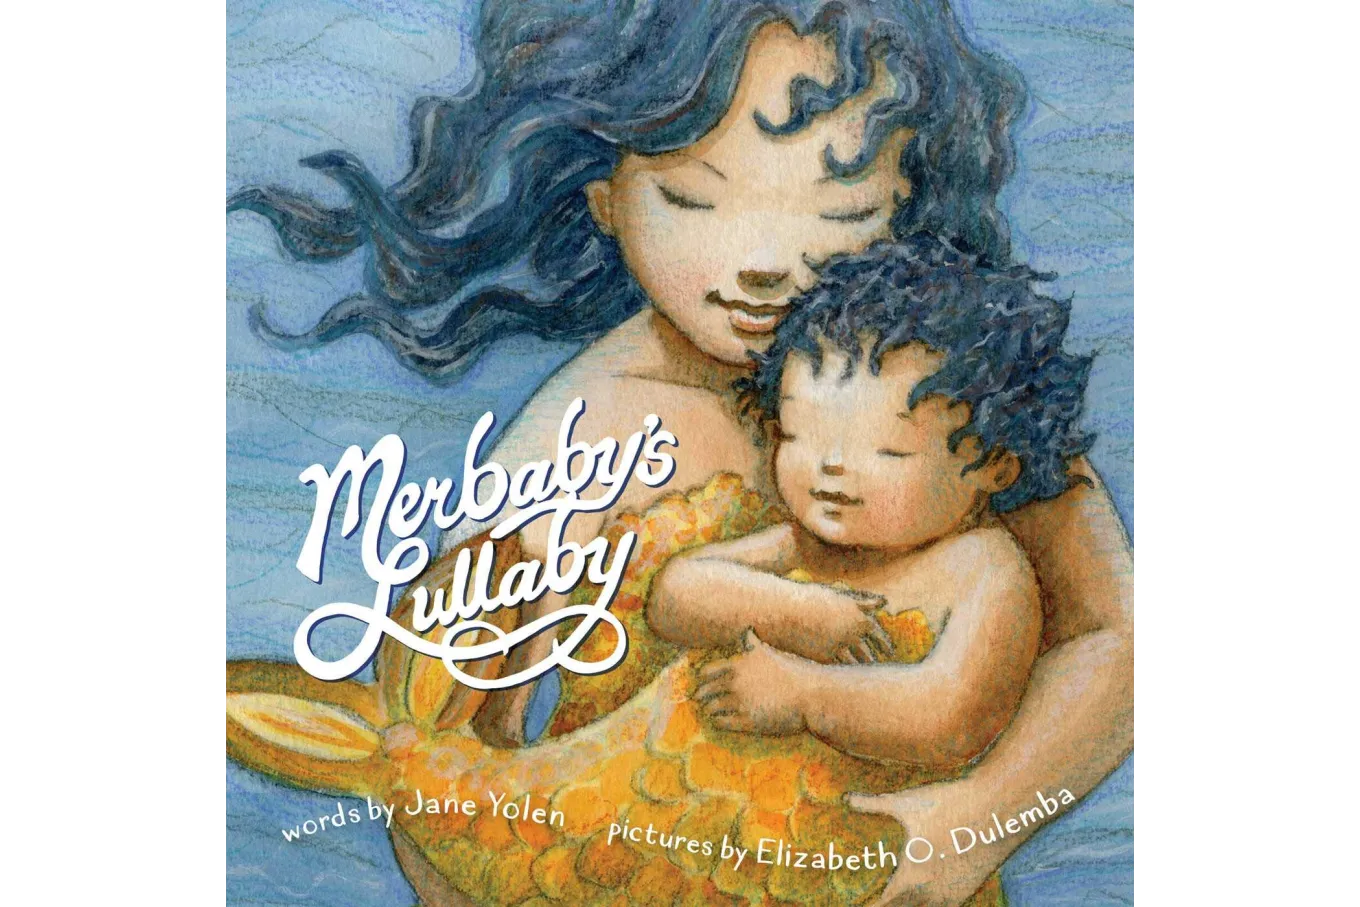 Book cover of Merbaby's Lullaby.